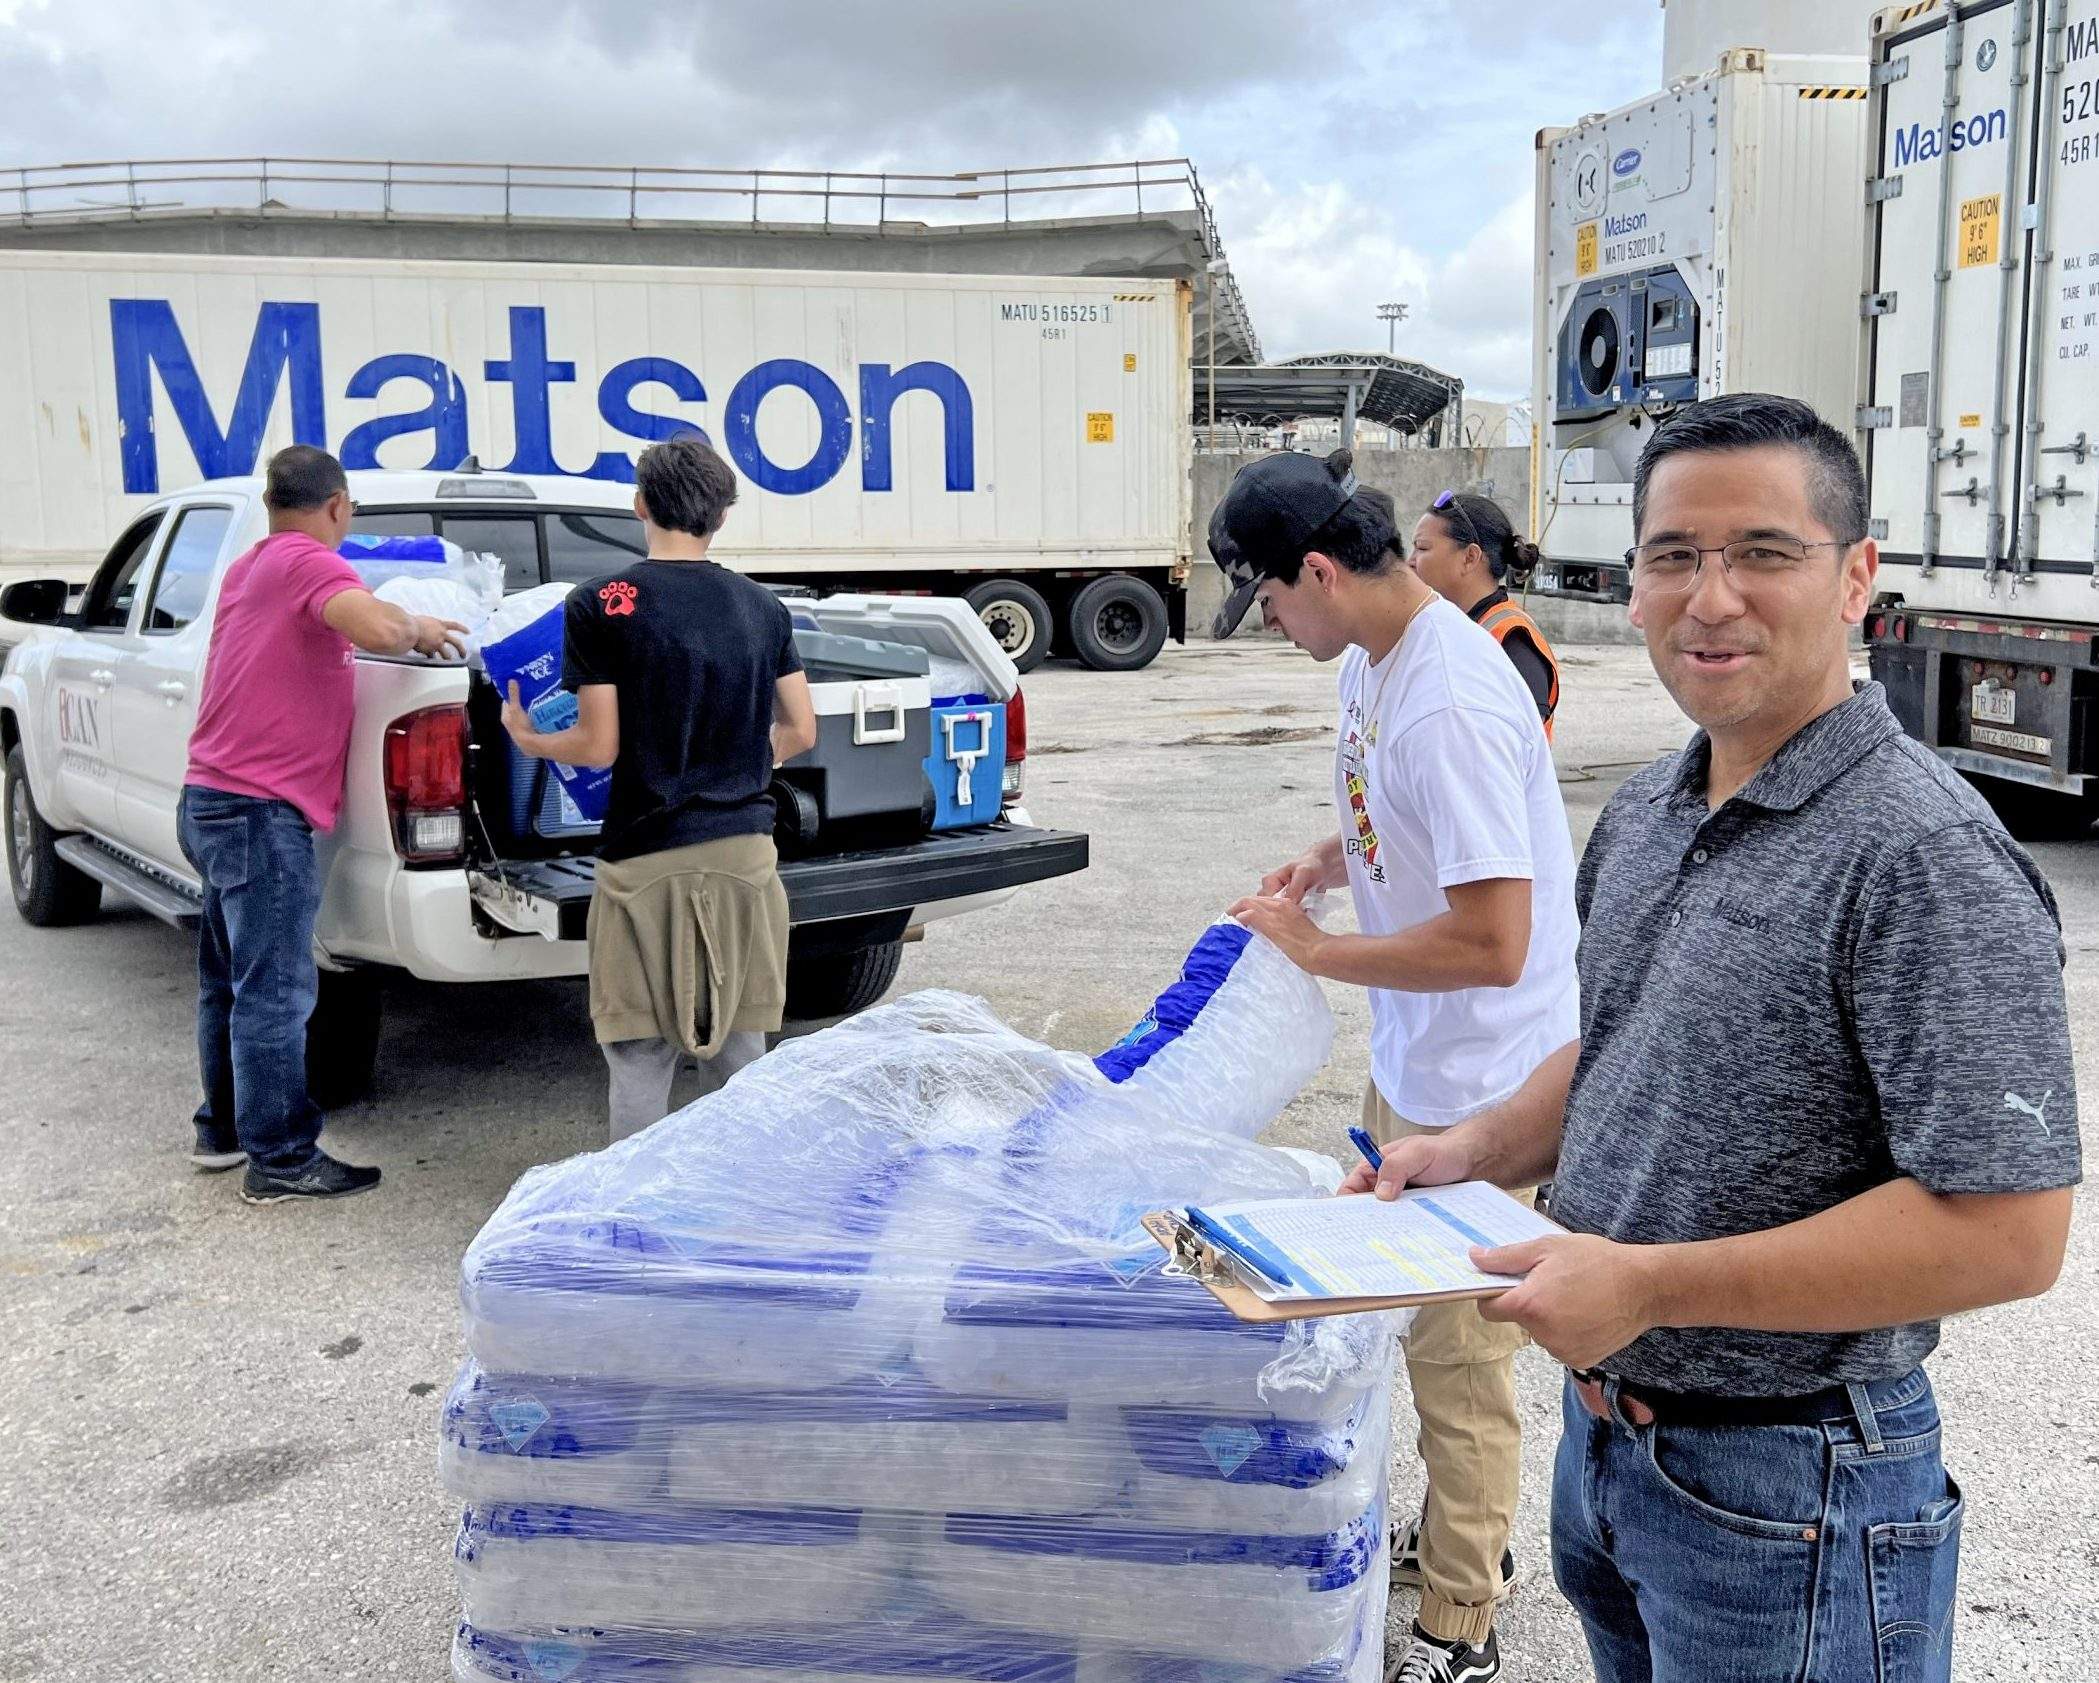 Matson employees move bags of ice from a pallet into ice chests with Matson reefer and containers in the background.